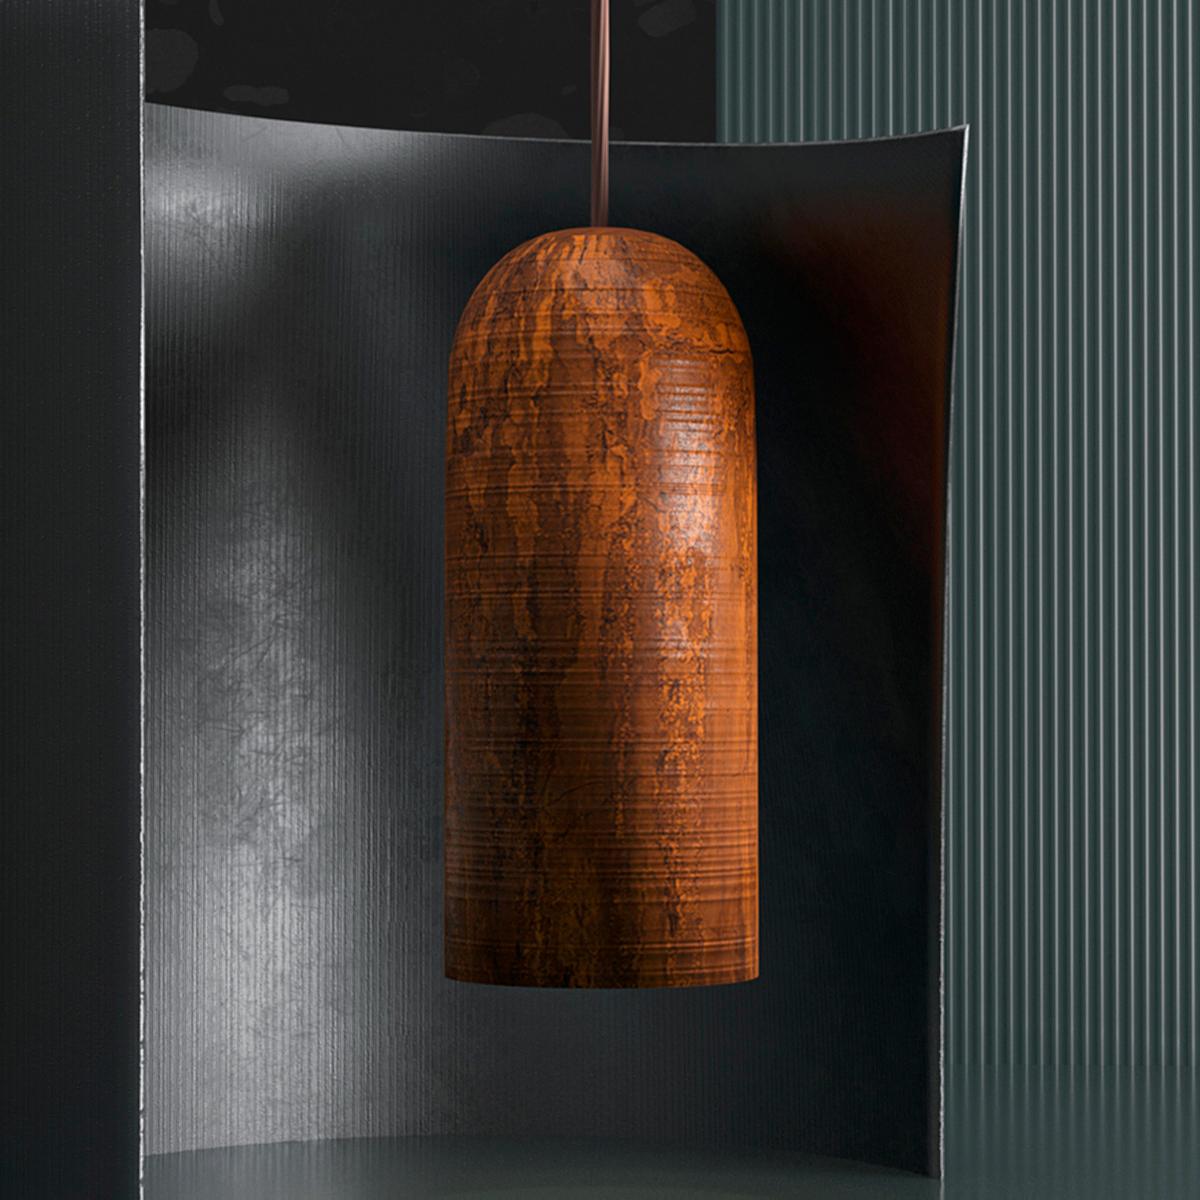 Runa lighting by Makhno Studio
Design by Sergey Makhno, 2016
Dimensions: H 45 x W 20 x D 20 cm
Materials: ceramics

All our lamps can be wired according to each country. If sold to the USA it will be wired for the USA for instance.

Makhno